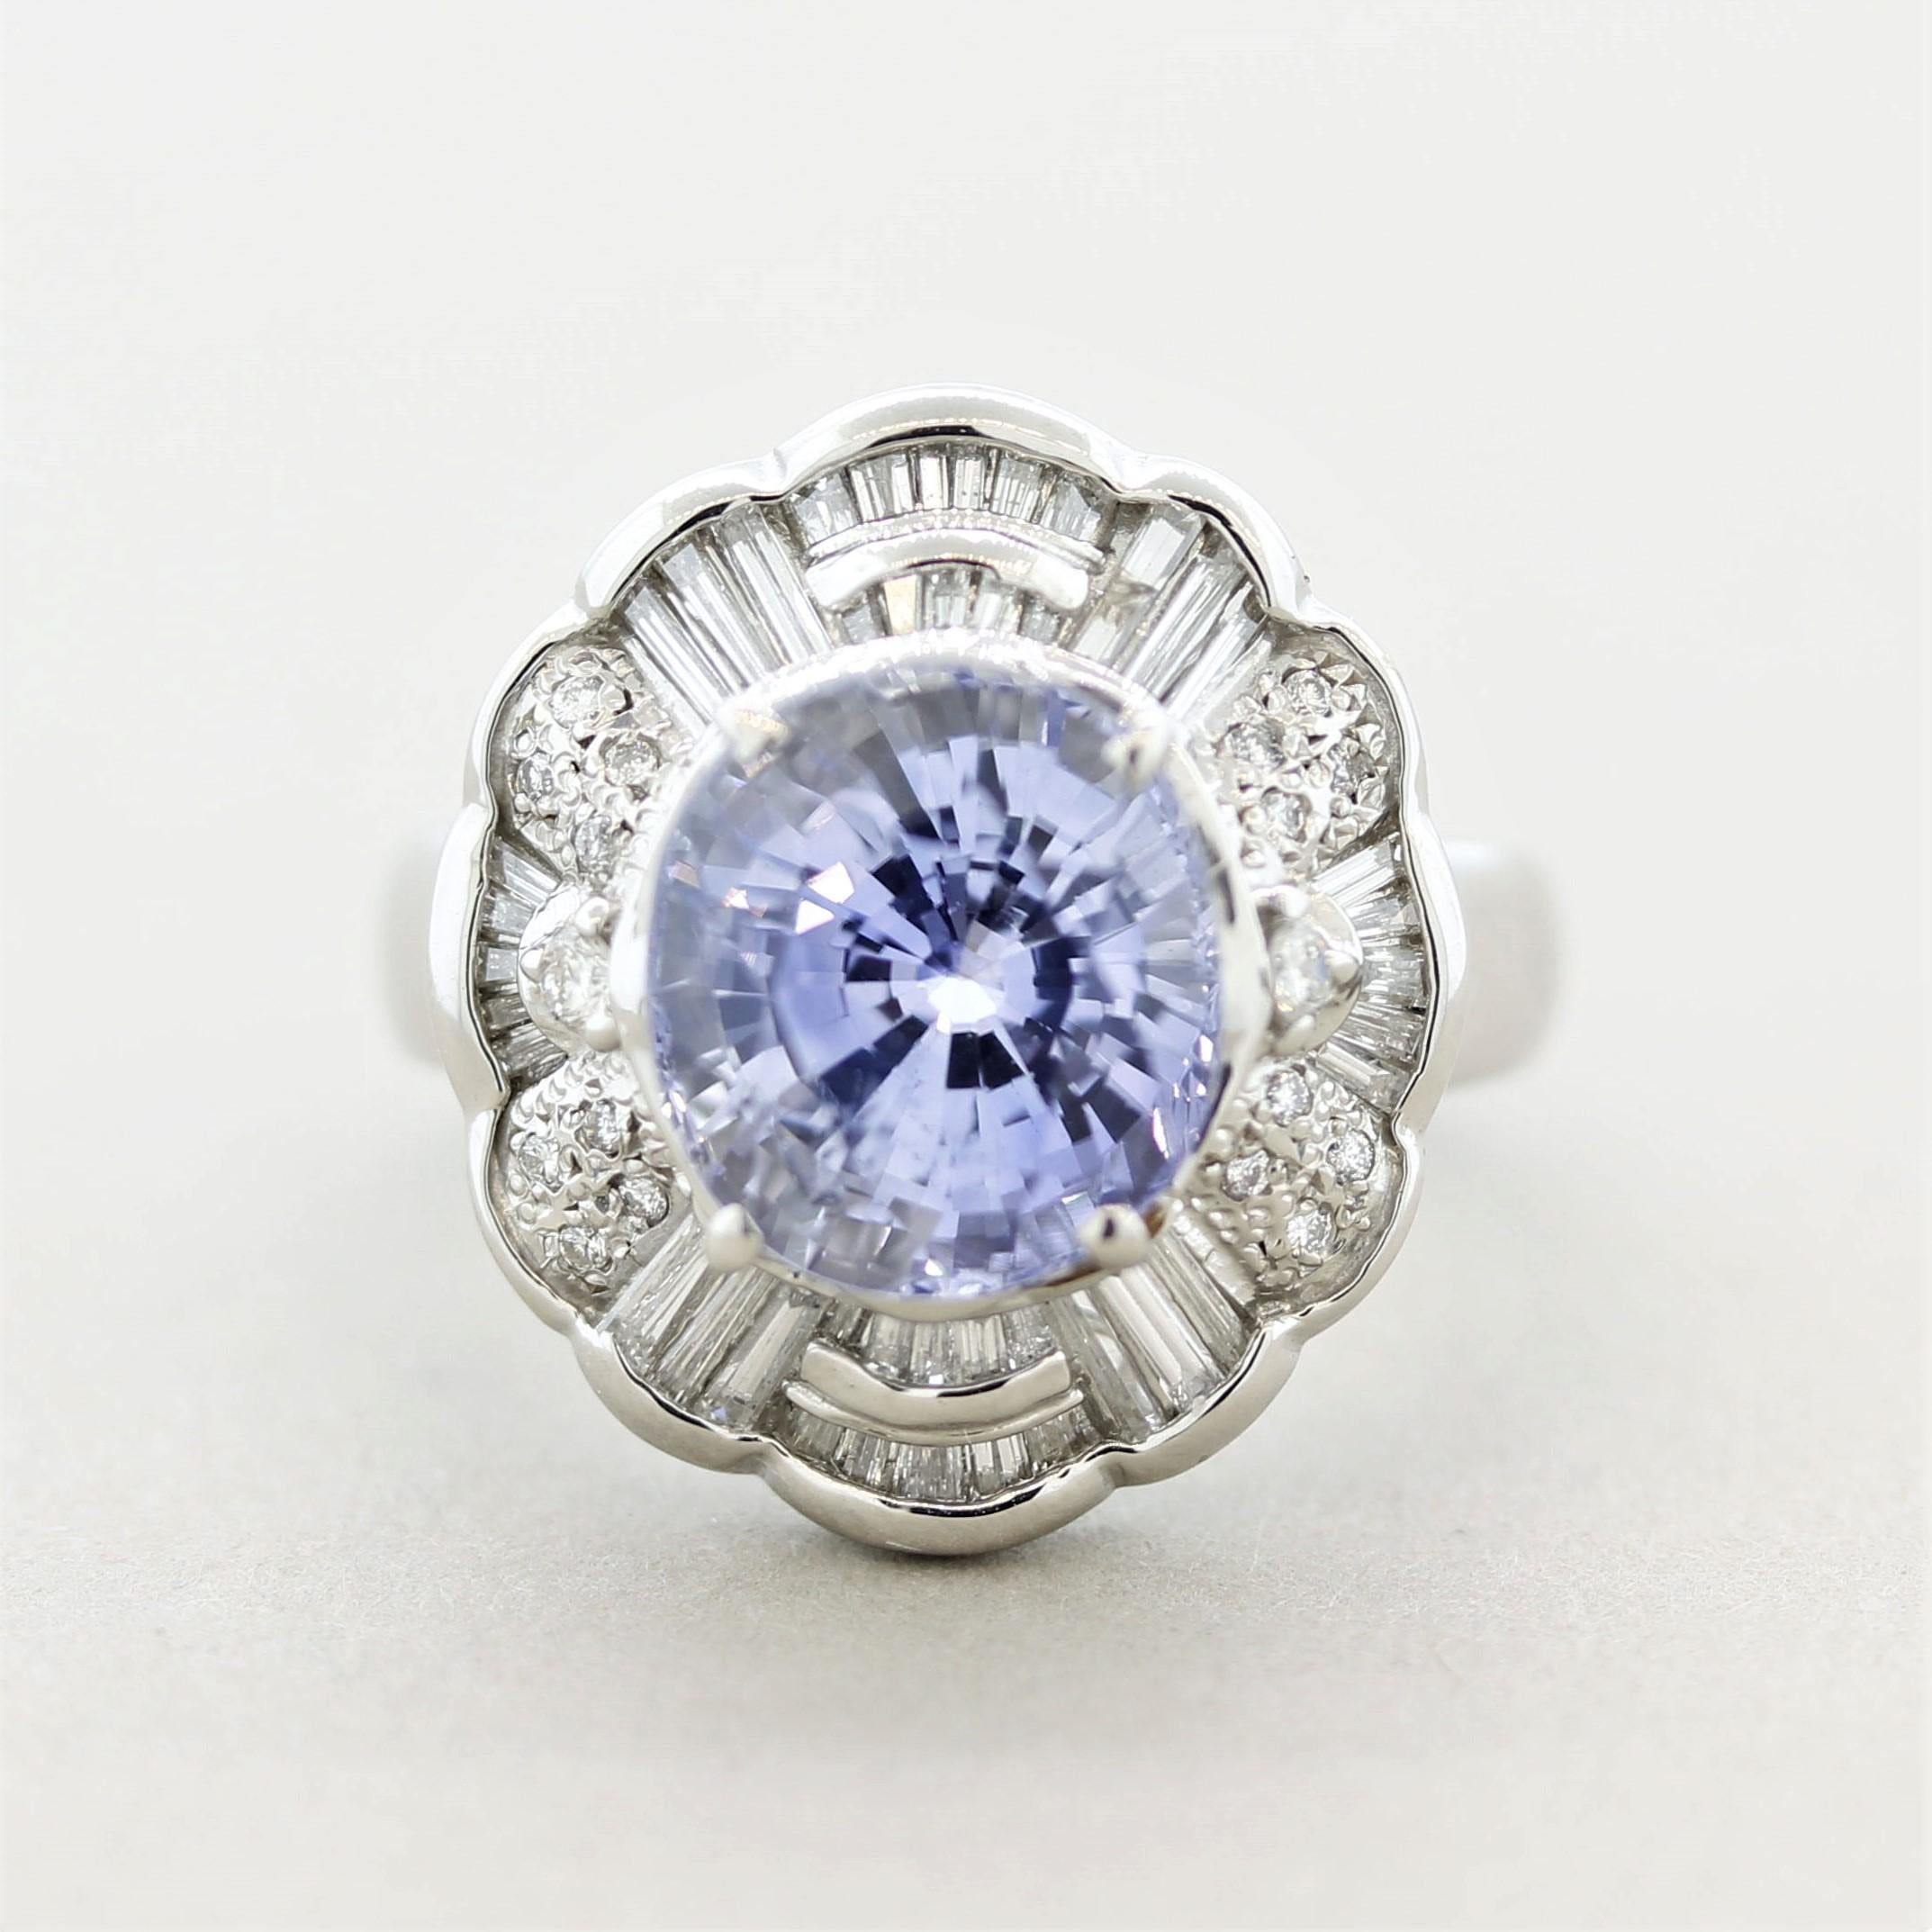 A bright and vibrant 6.50 carats blue sapphire takes center stage! It is a light yet brilliant blue color that is free of any eye-visible inclusions allowing the stones brilliance to showcase. It is accented by 0.79 carats of round brilliant-cut and